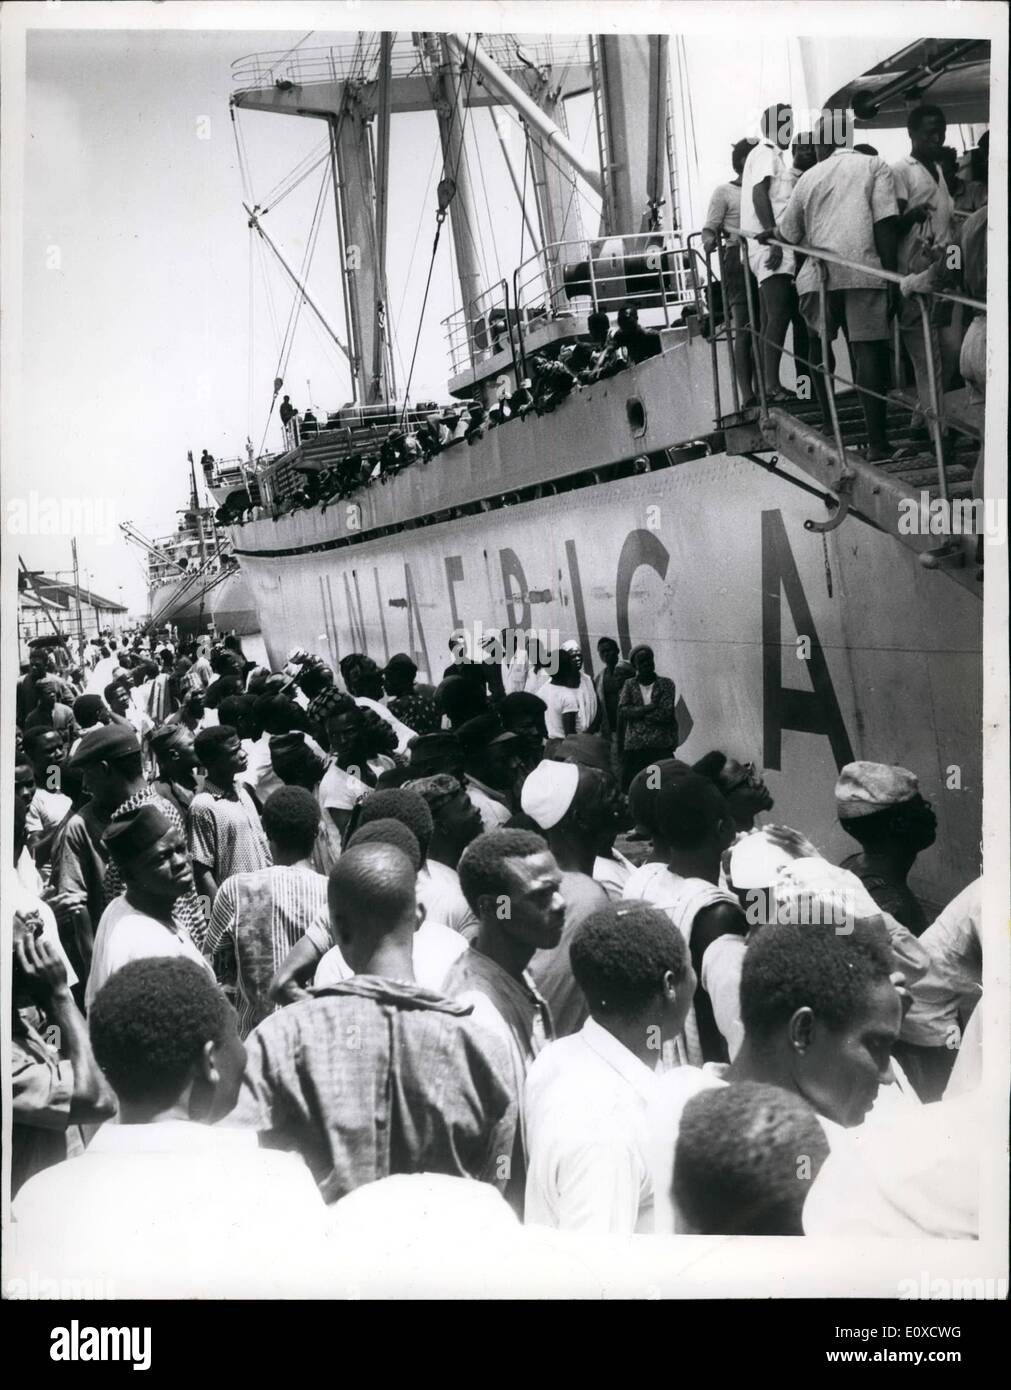 Jun. 06, 1966 - Tribal Conflicts Uproot Nigerians: Picture 2, shows on-board Yorubas (Western Nigerians) in the ship which brought them to Lagos from the East. Worried and expectant relations who had gathered to see if their relations were among those the ship brought down from the East, are seen by the ship. Some of them left the dockyard disappointed their relations were either on their way home or had been slaughtered. Stock Photo